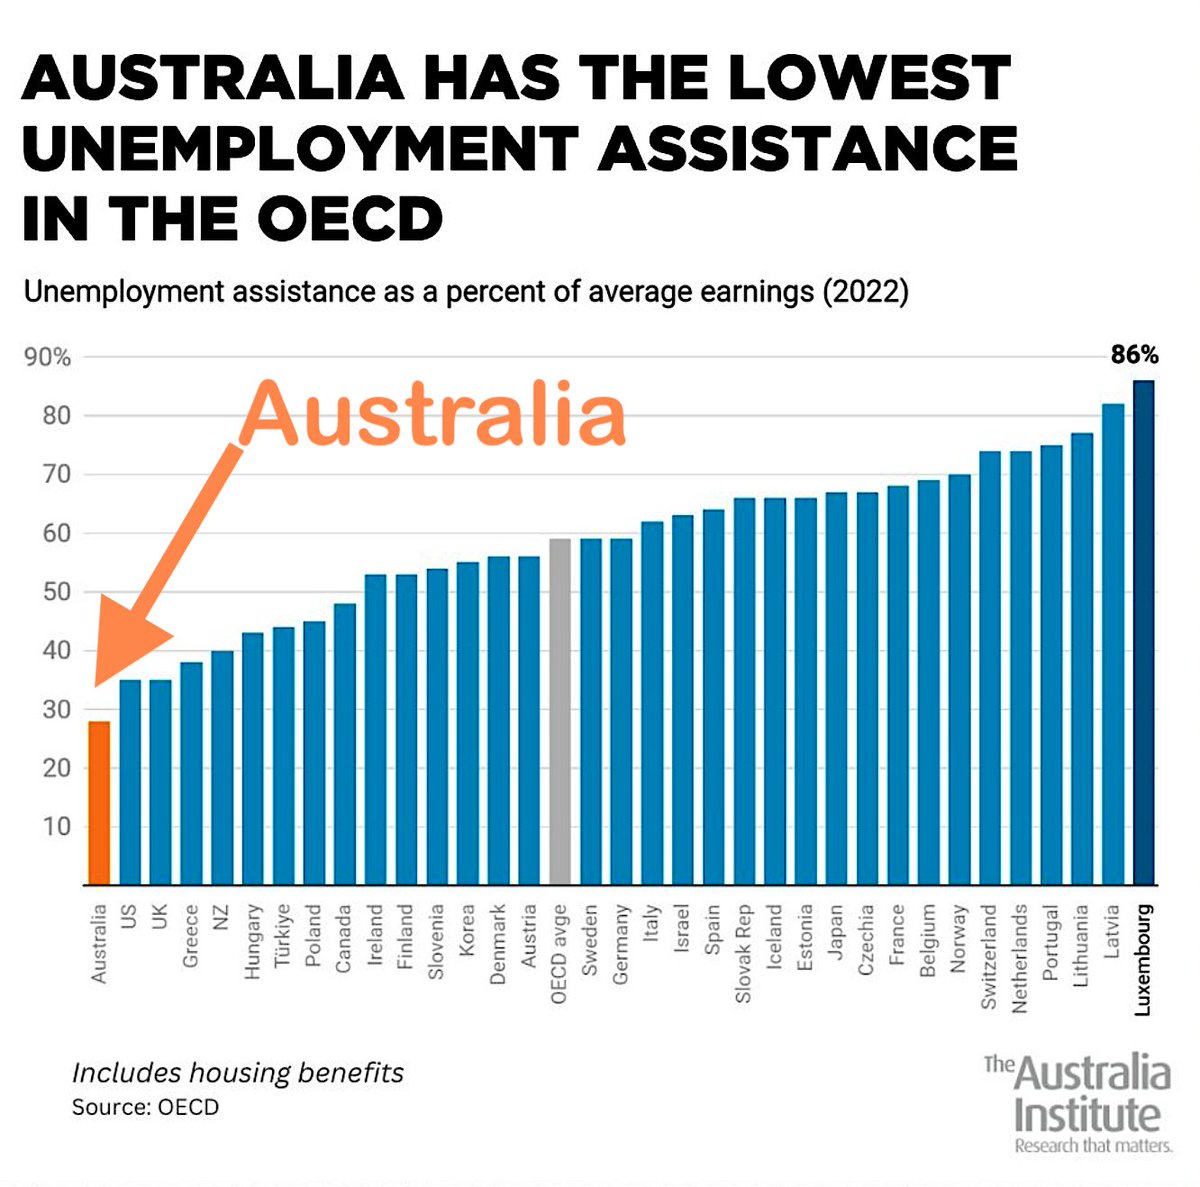 Raise the Rate Raise the Bloody Rate Raise the Fucking Rate This will address so many other Australian social issues, it's disgracefully & cruelly low. @AlboMP @JEChalmers @AustralianLabor #RaisetheRate #auspol